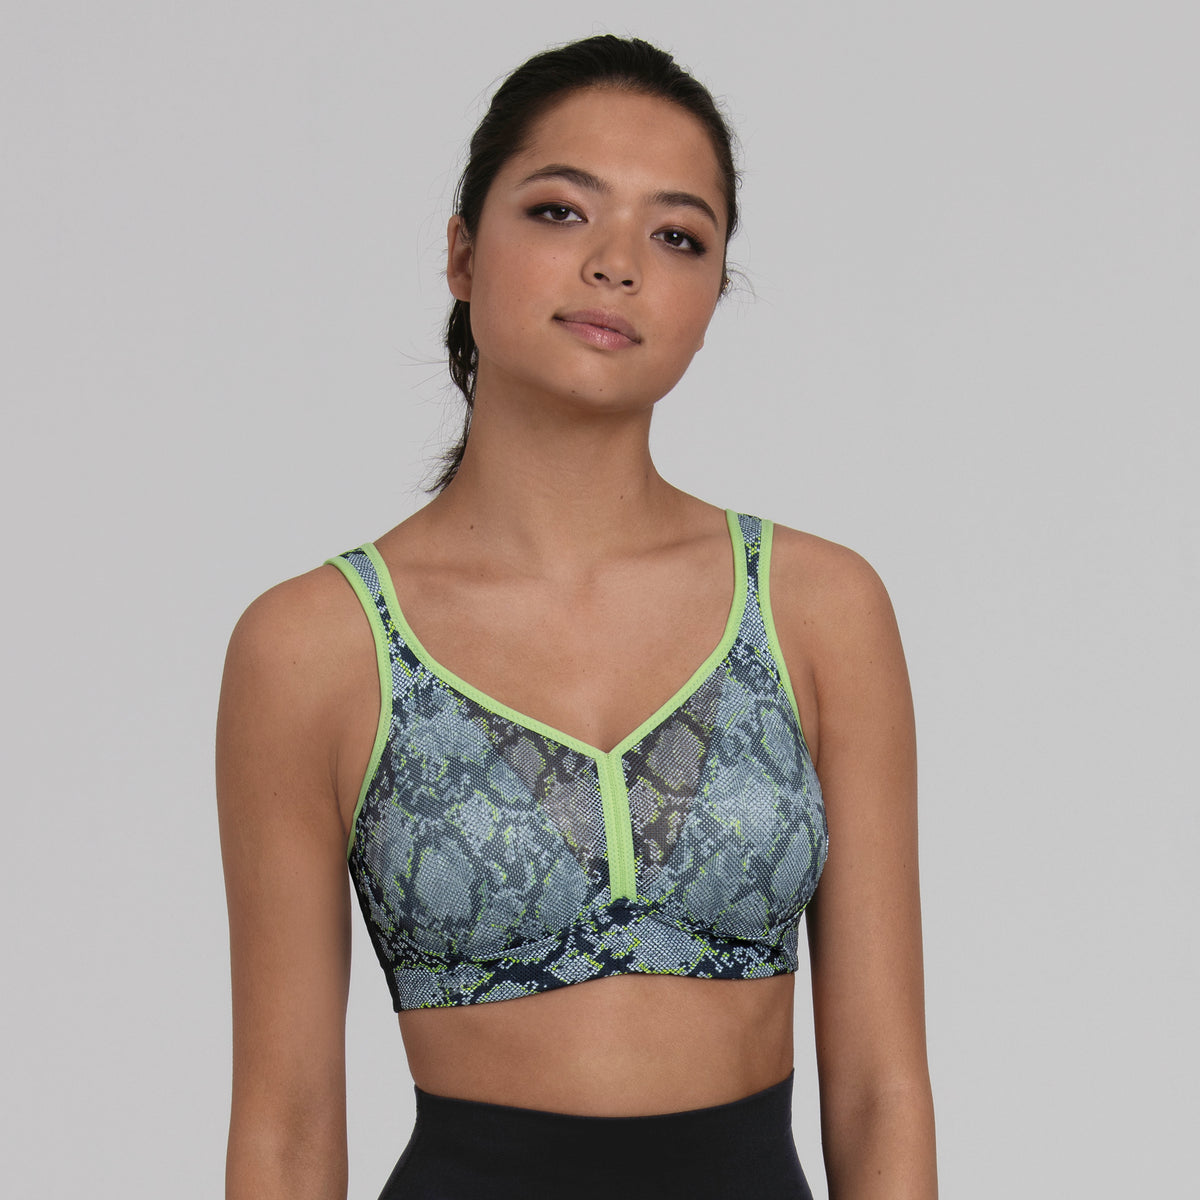 ANITA AIR CONTROL SPORTS BRA WITH PADDED CUPS - VIPER GREY – Tops